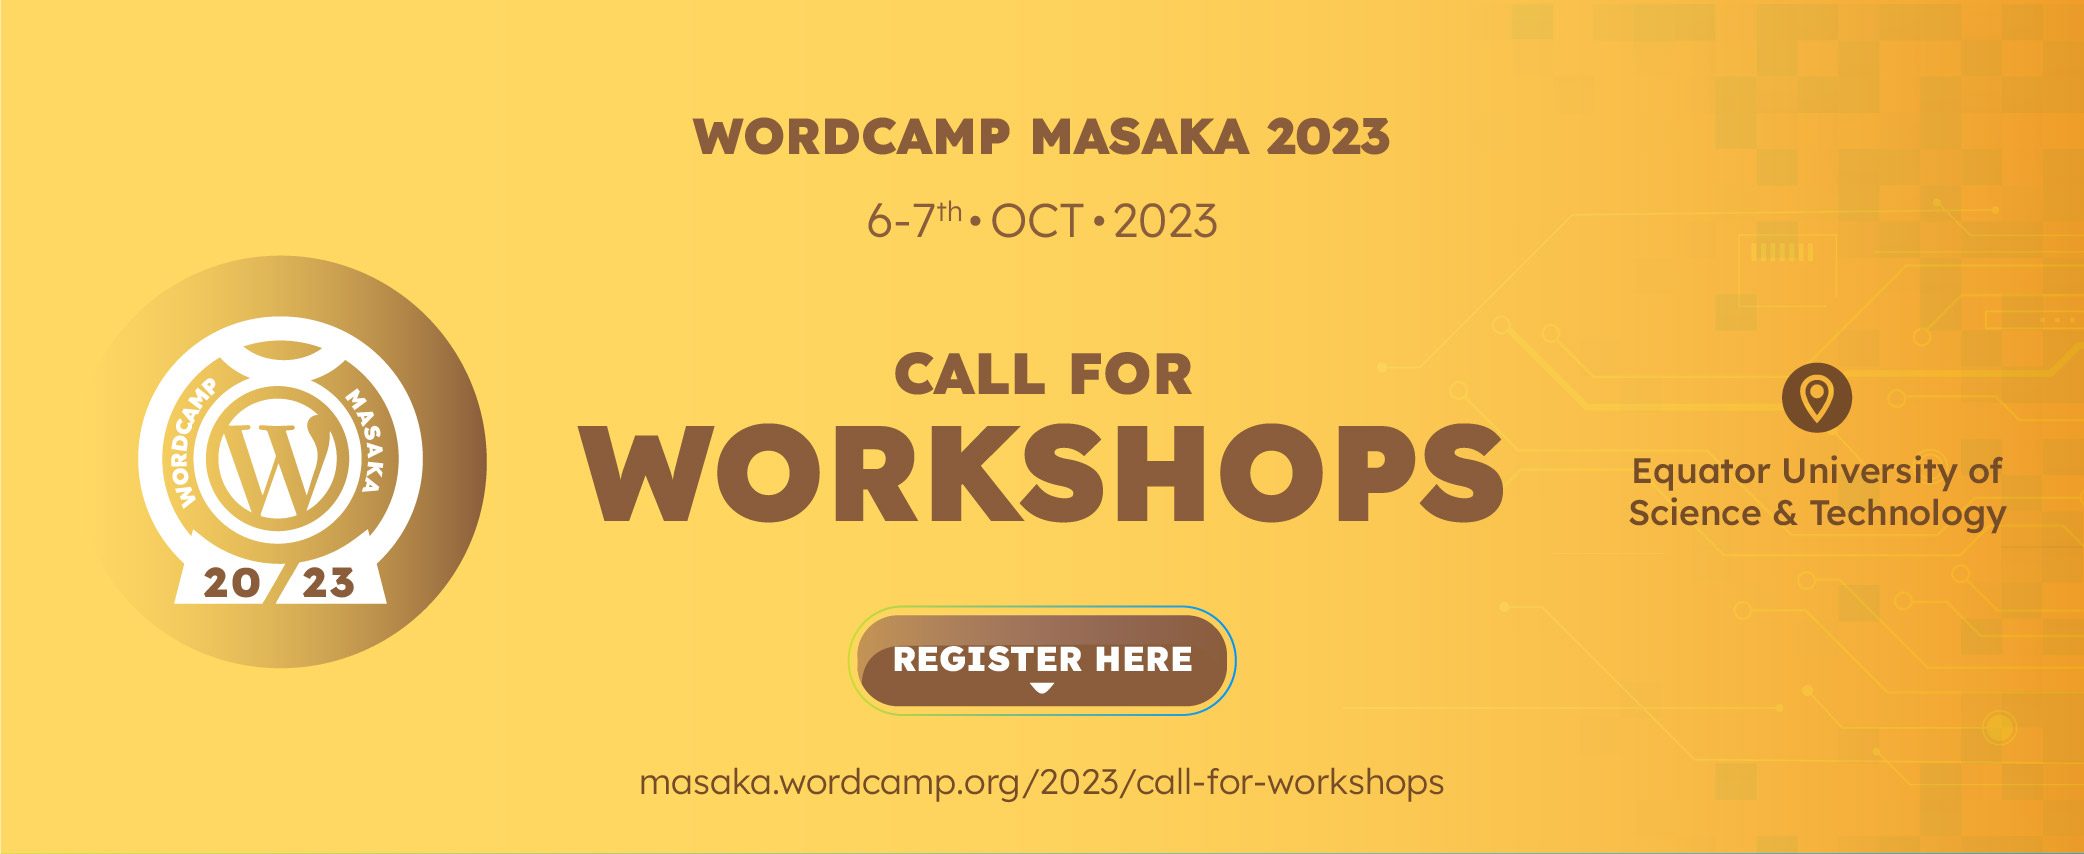 Call for Workshop Proposal